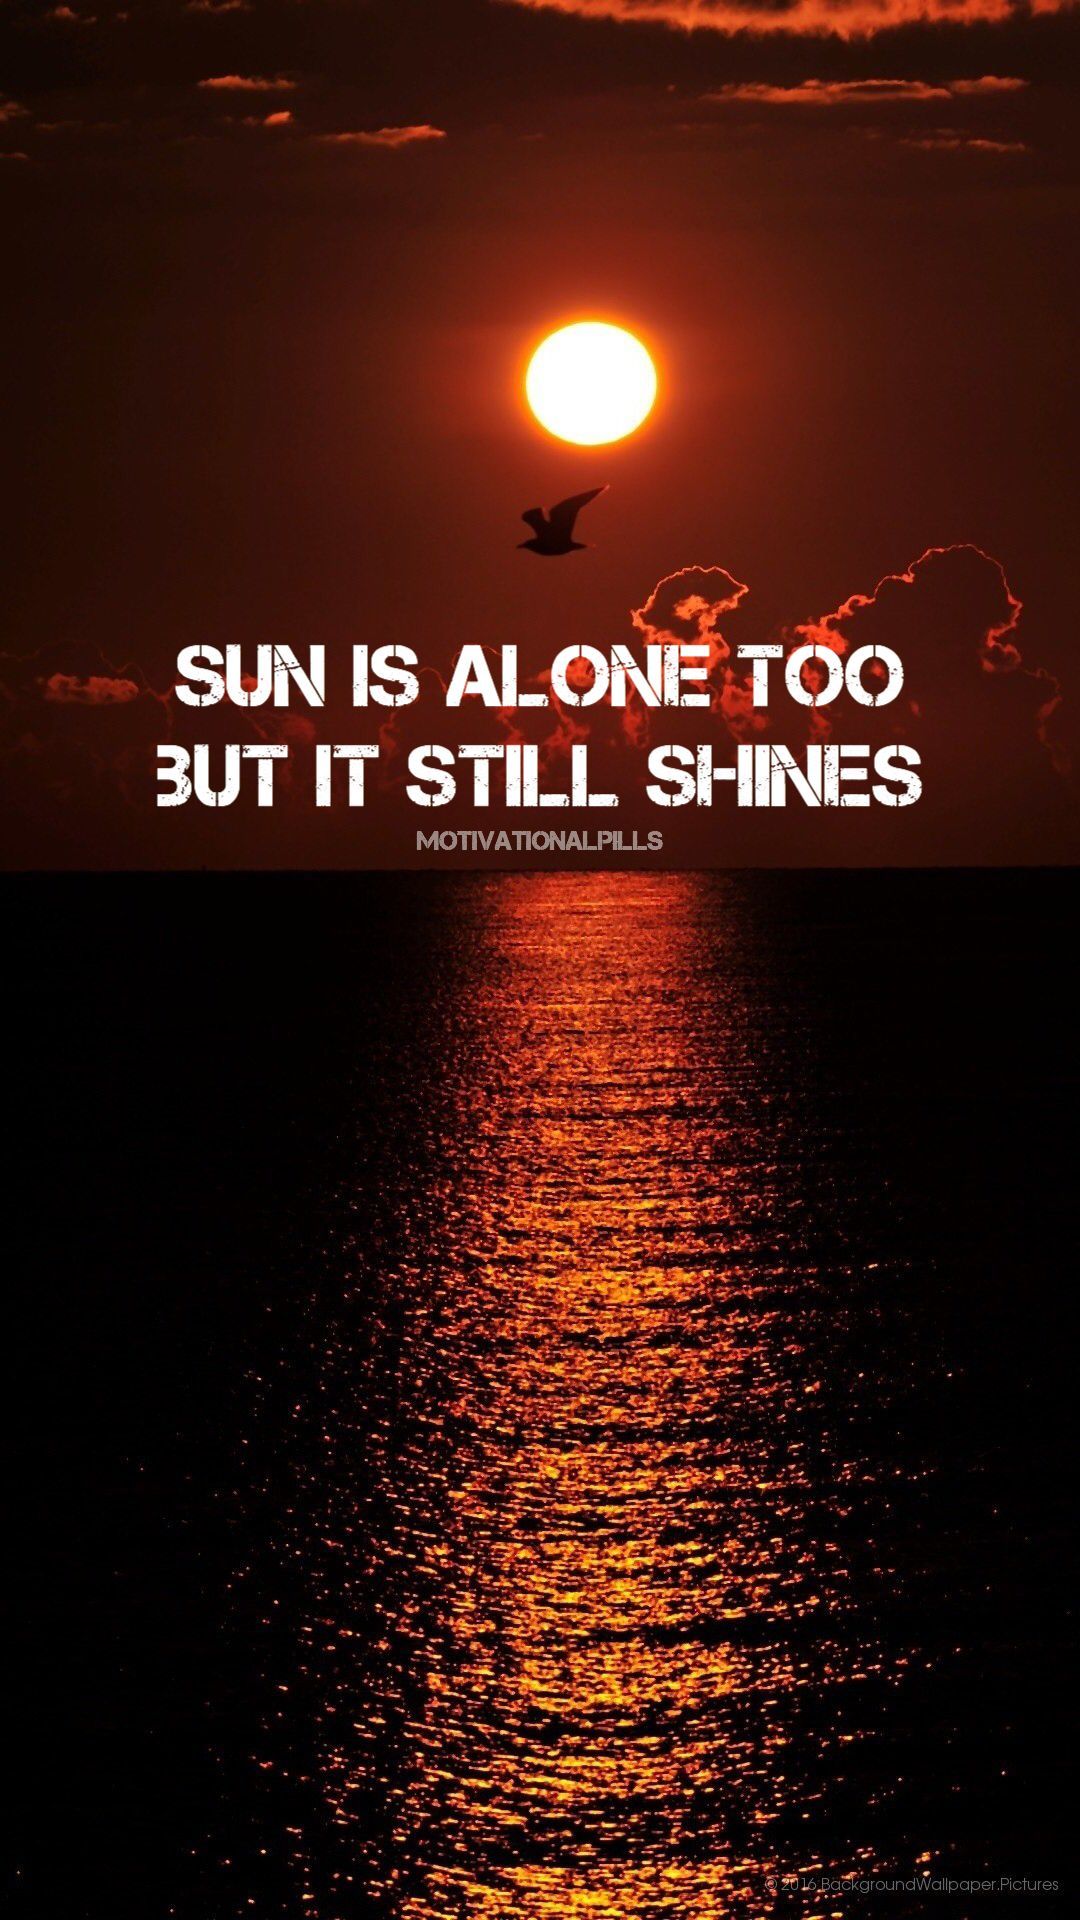 SUN IS ALONE TOO BUT IT STILL SHINES❗️. Self motivation quotes, Wallpaper quotes, Inspirational quotes wallpaper